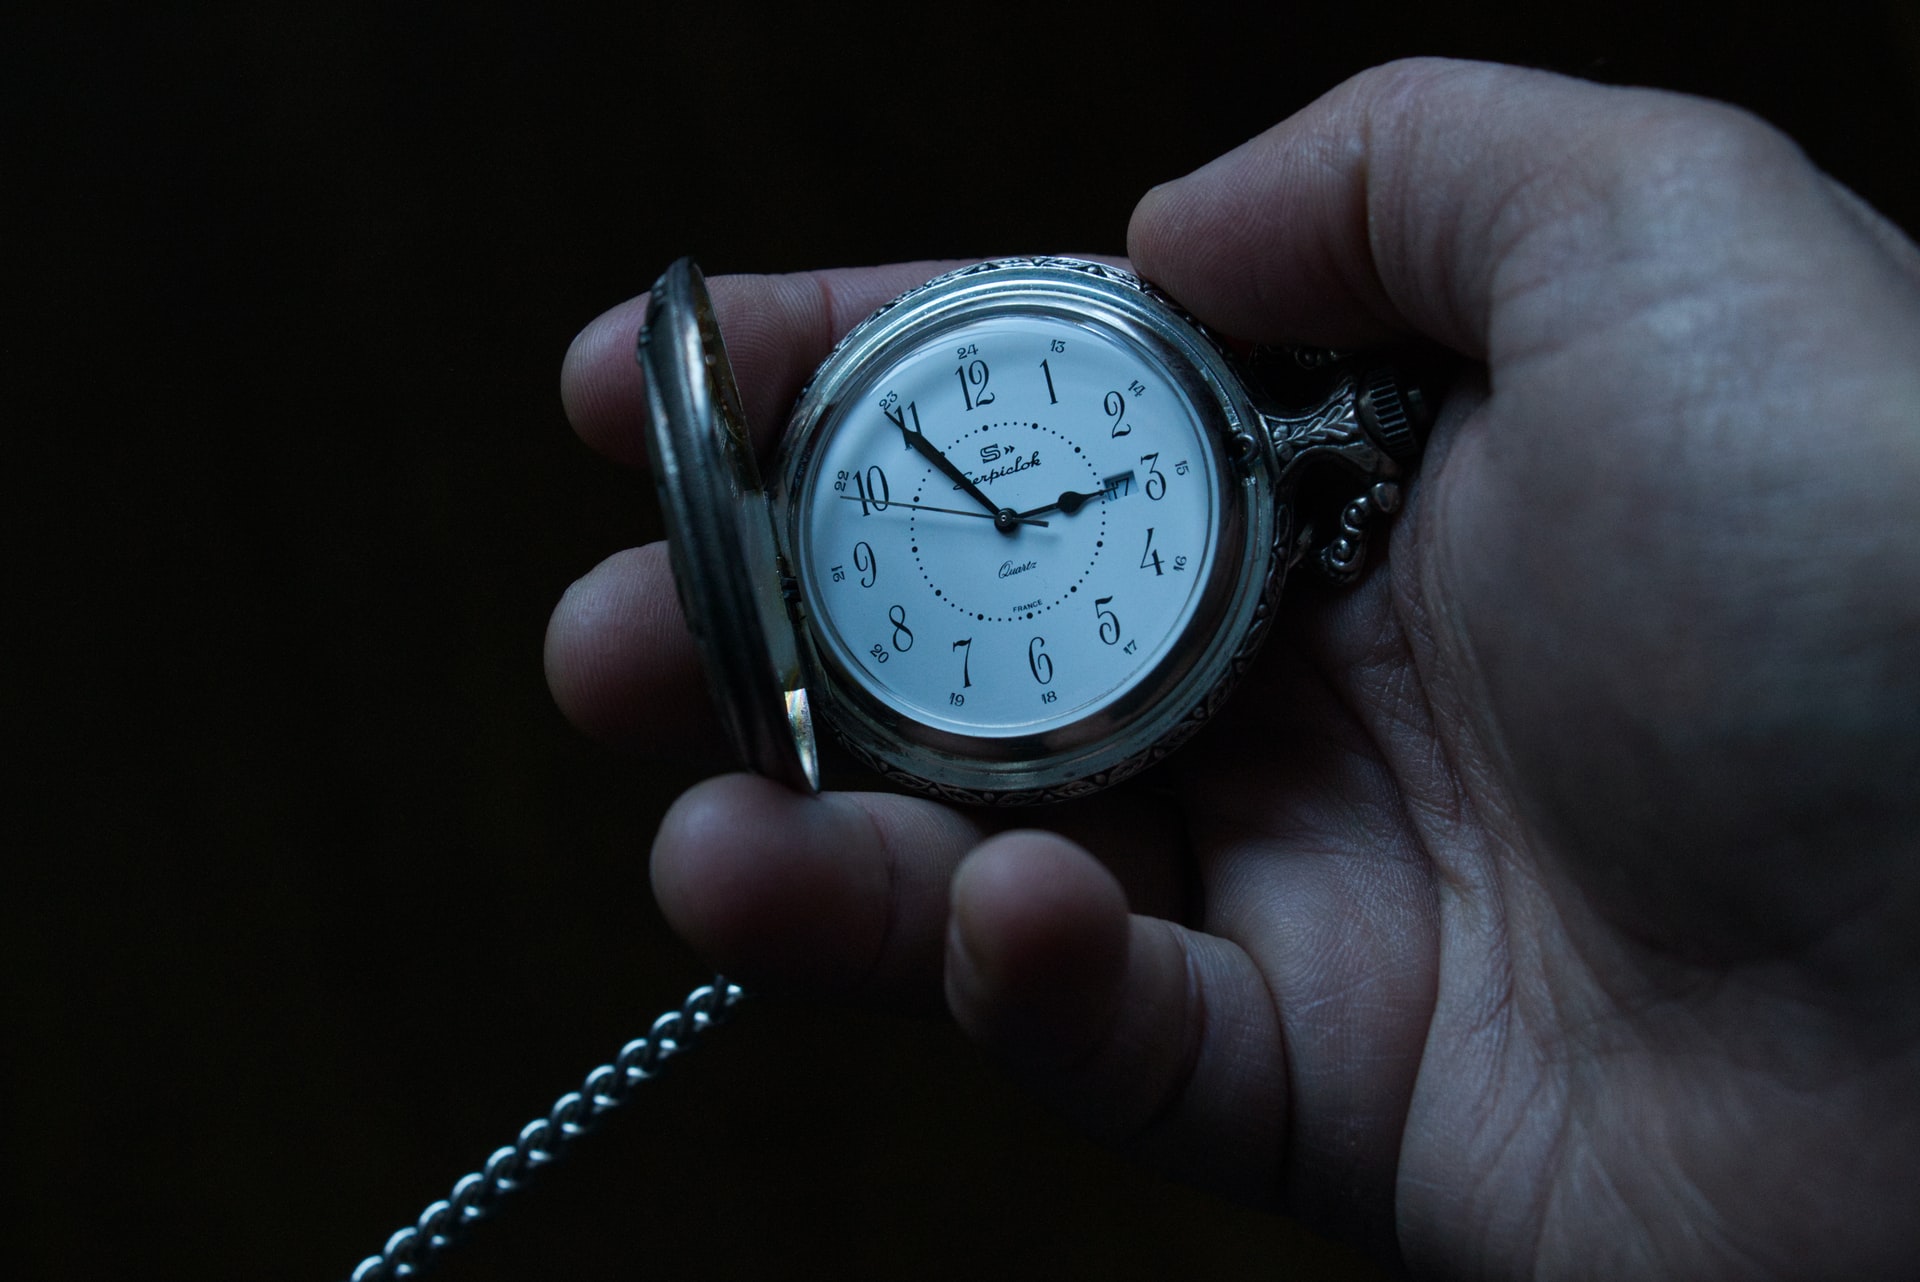 a pocket watch to symbolise waiting before responding